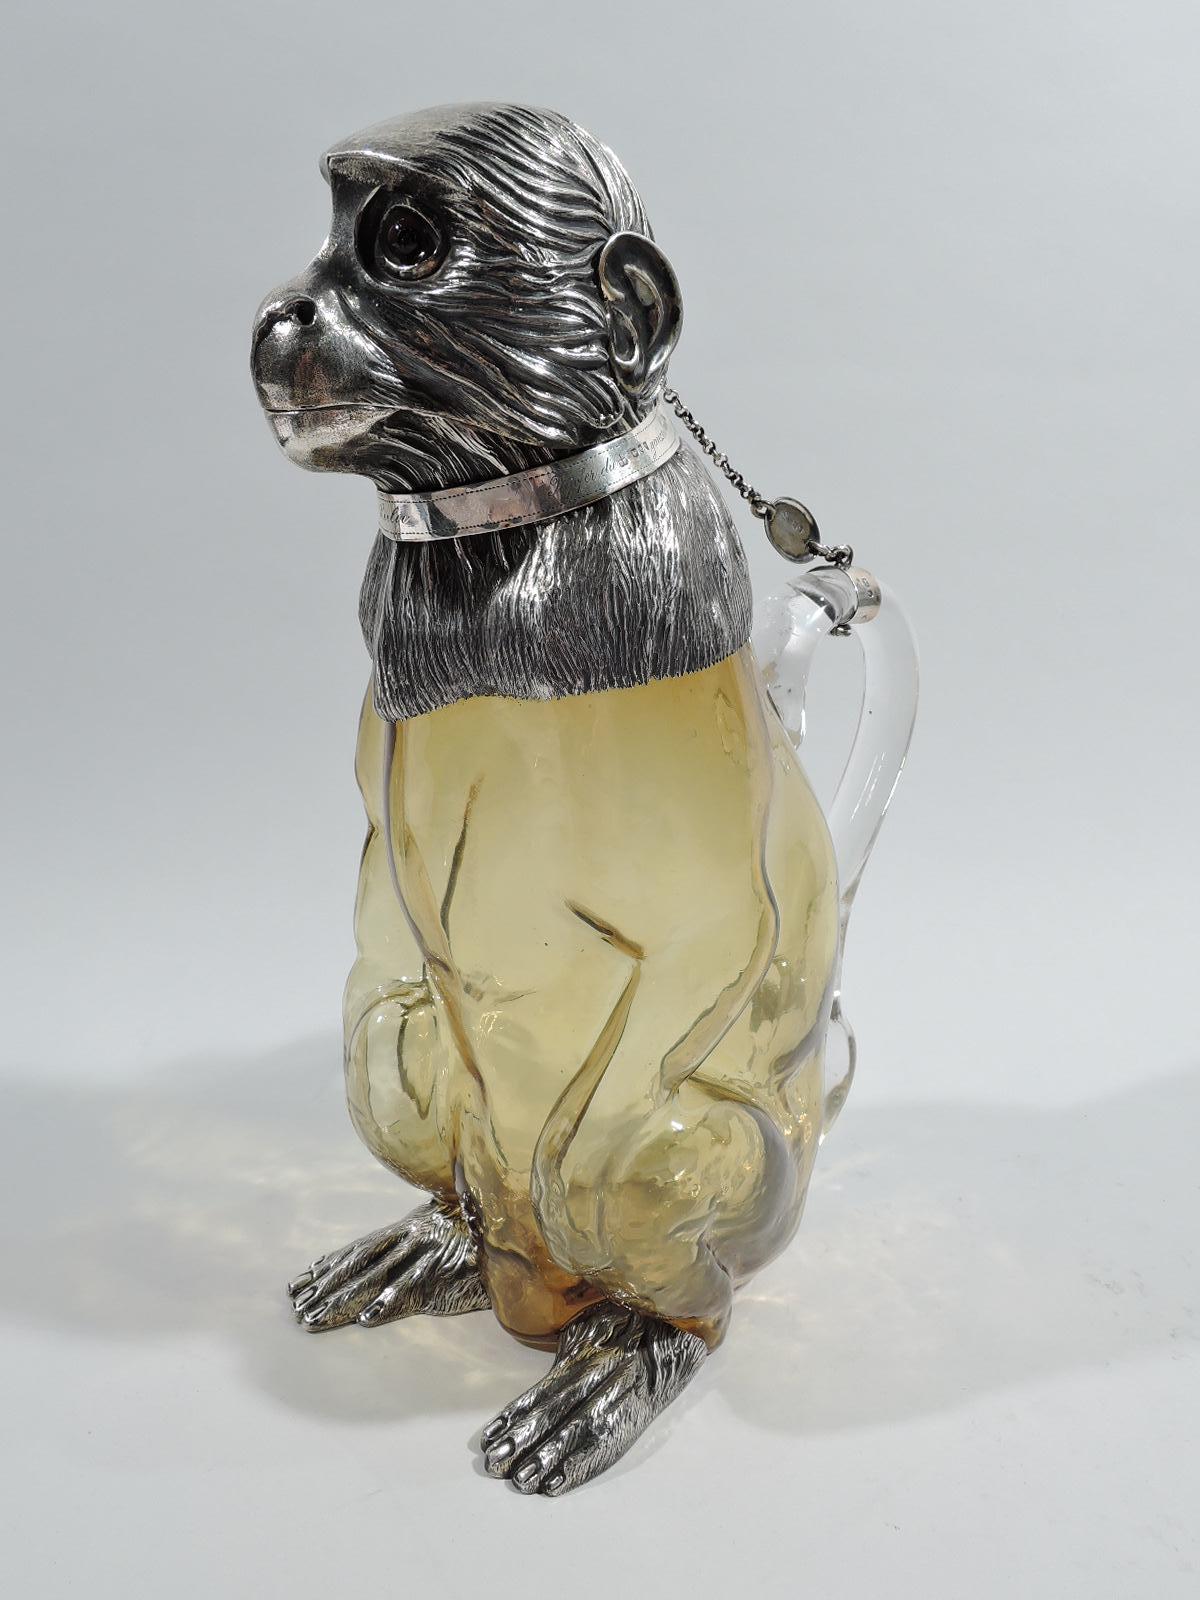 Victorian sterling silver and glass figural monkey decanter. Made by Richard Hodd & Son in London in 1893. Glass body with hands resting on haunches. Tail-form handle. Tensile hind paws in sterling silver as is shaggy-furred shoulder mount with